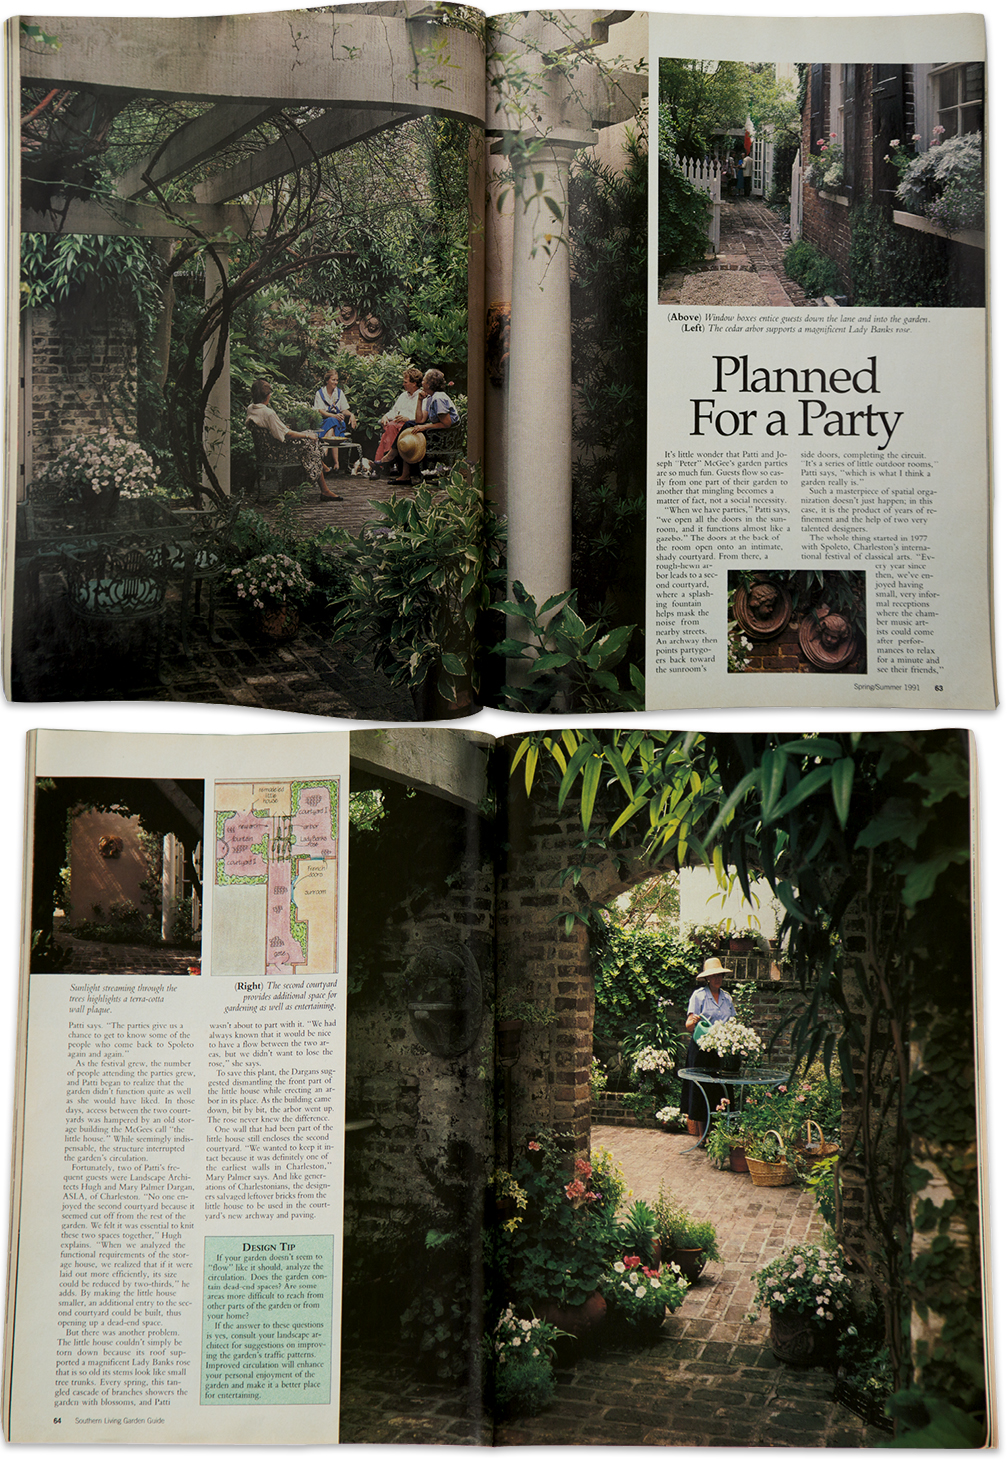 IN THE SPOTLIGHT: The McGees’ courtyard garden on Church Street as featured in Southern Living’s Spring/Summer 1991 Garden Guide